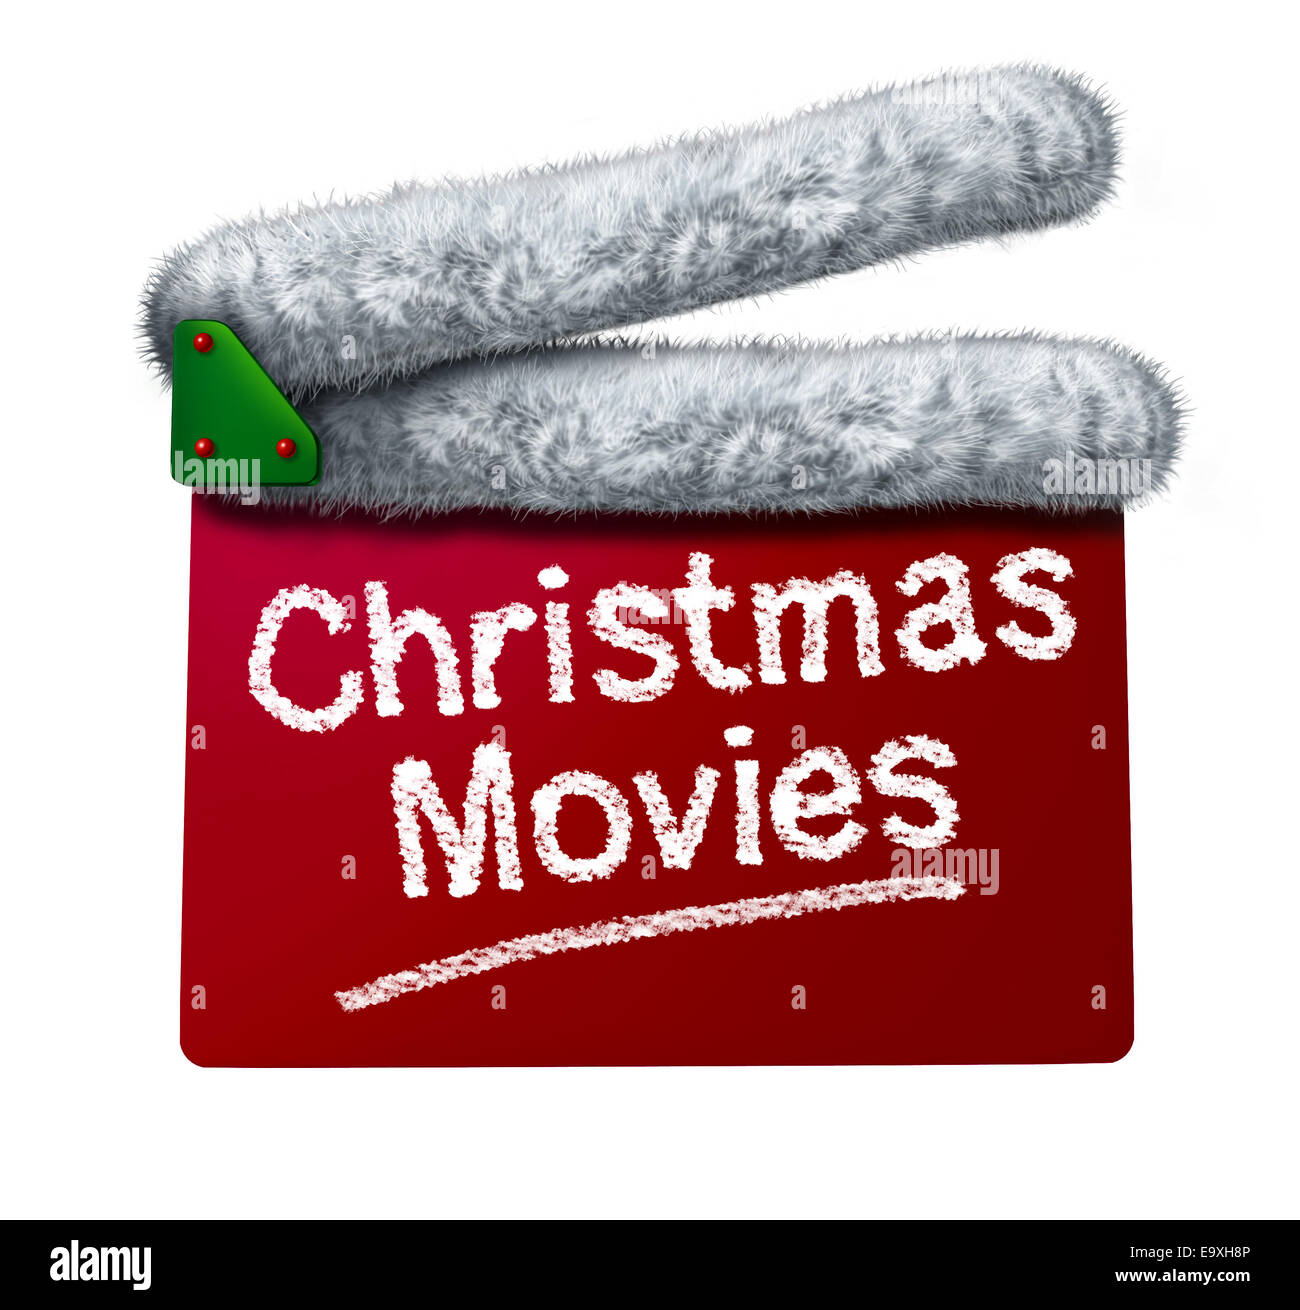 Christmas movies and holiday classic cinema and TV flicks with a red clapperboard and a Santa Clause hat white fur trim as an entertainment symbol of the winter film industry cinematic releases on a white background. Stock Photo